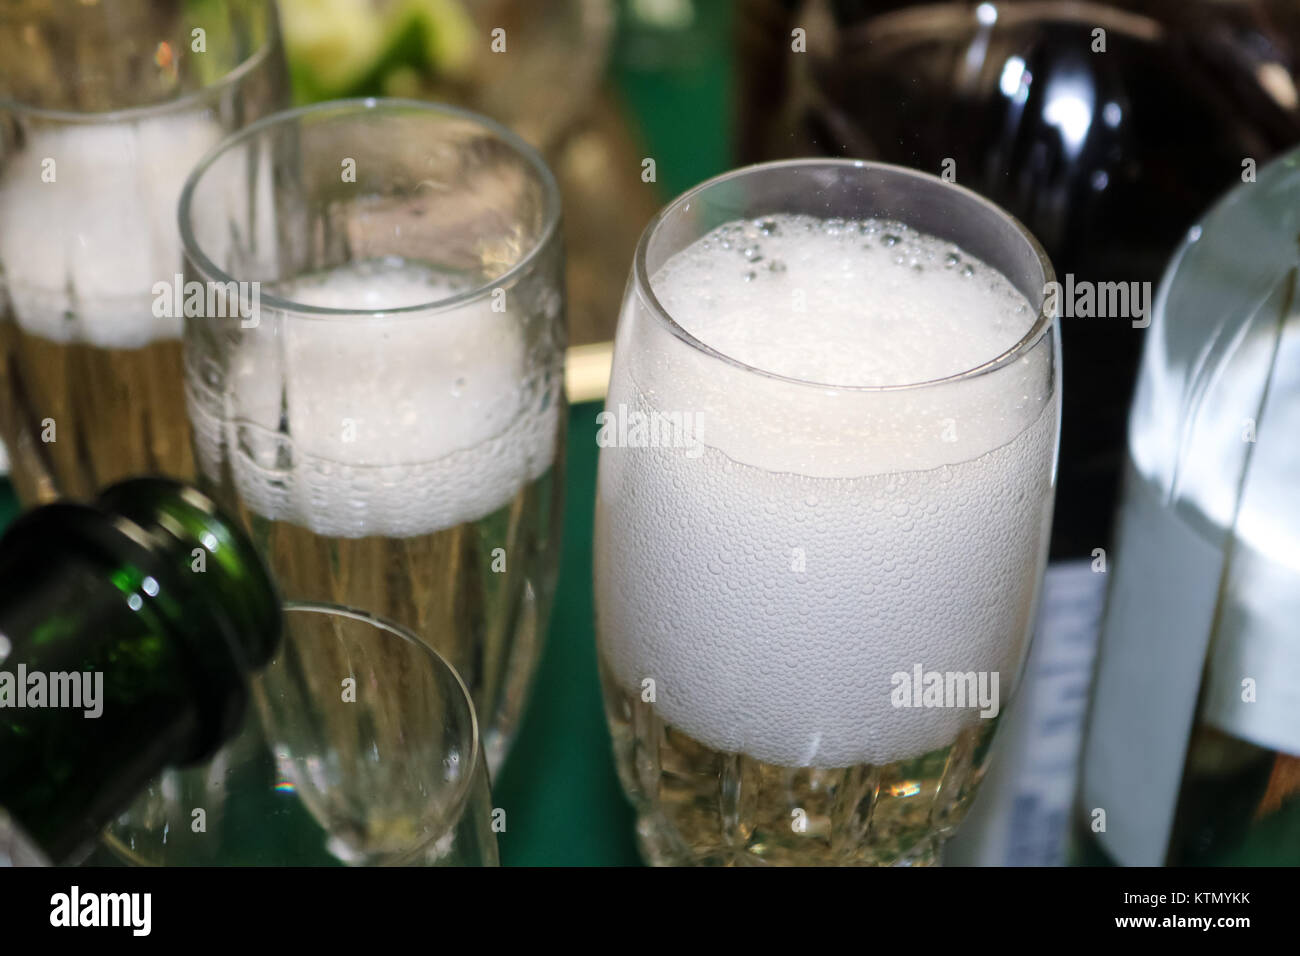 Bubbles coming off poured champagne in a foamy glass with surrounding bottle shapes and more champagne being poured Stock Photo